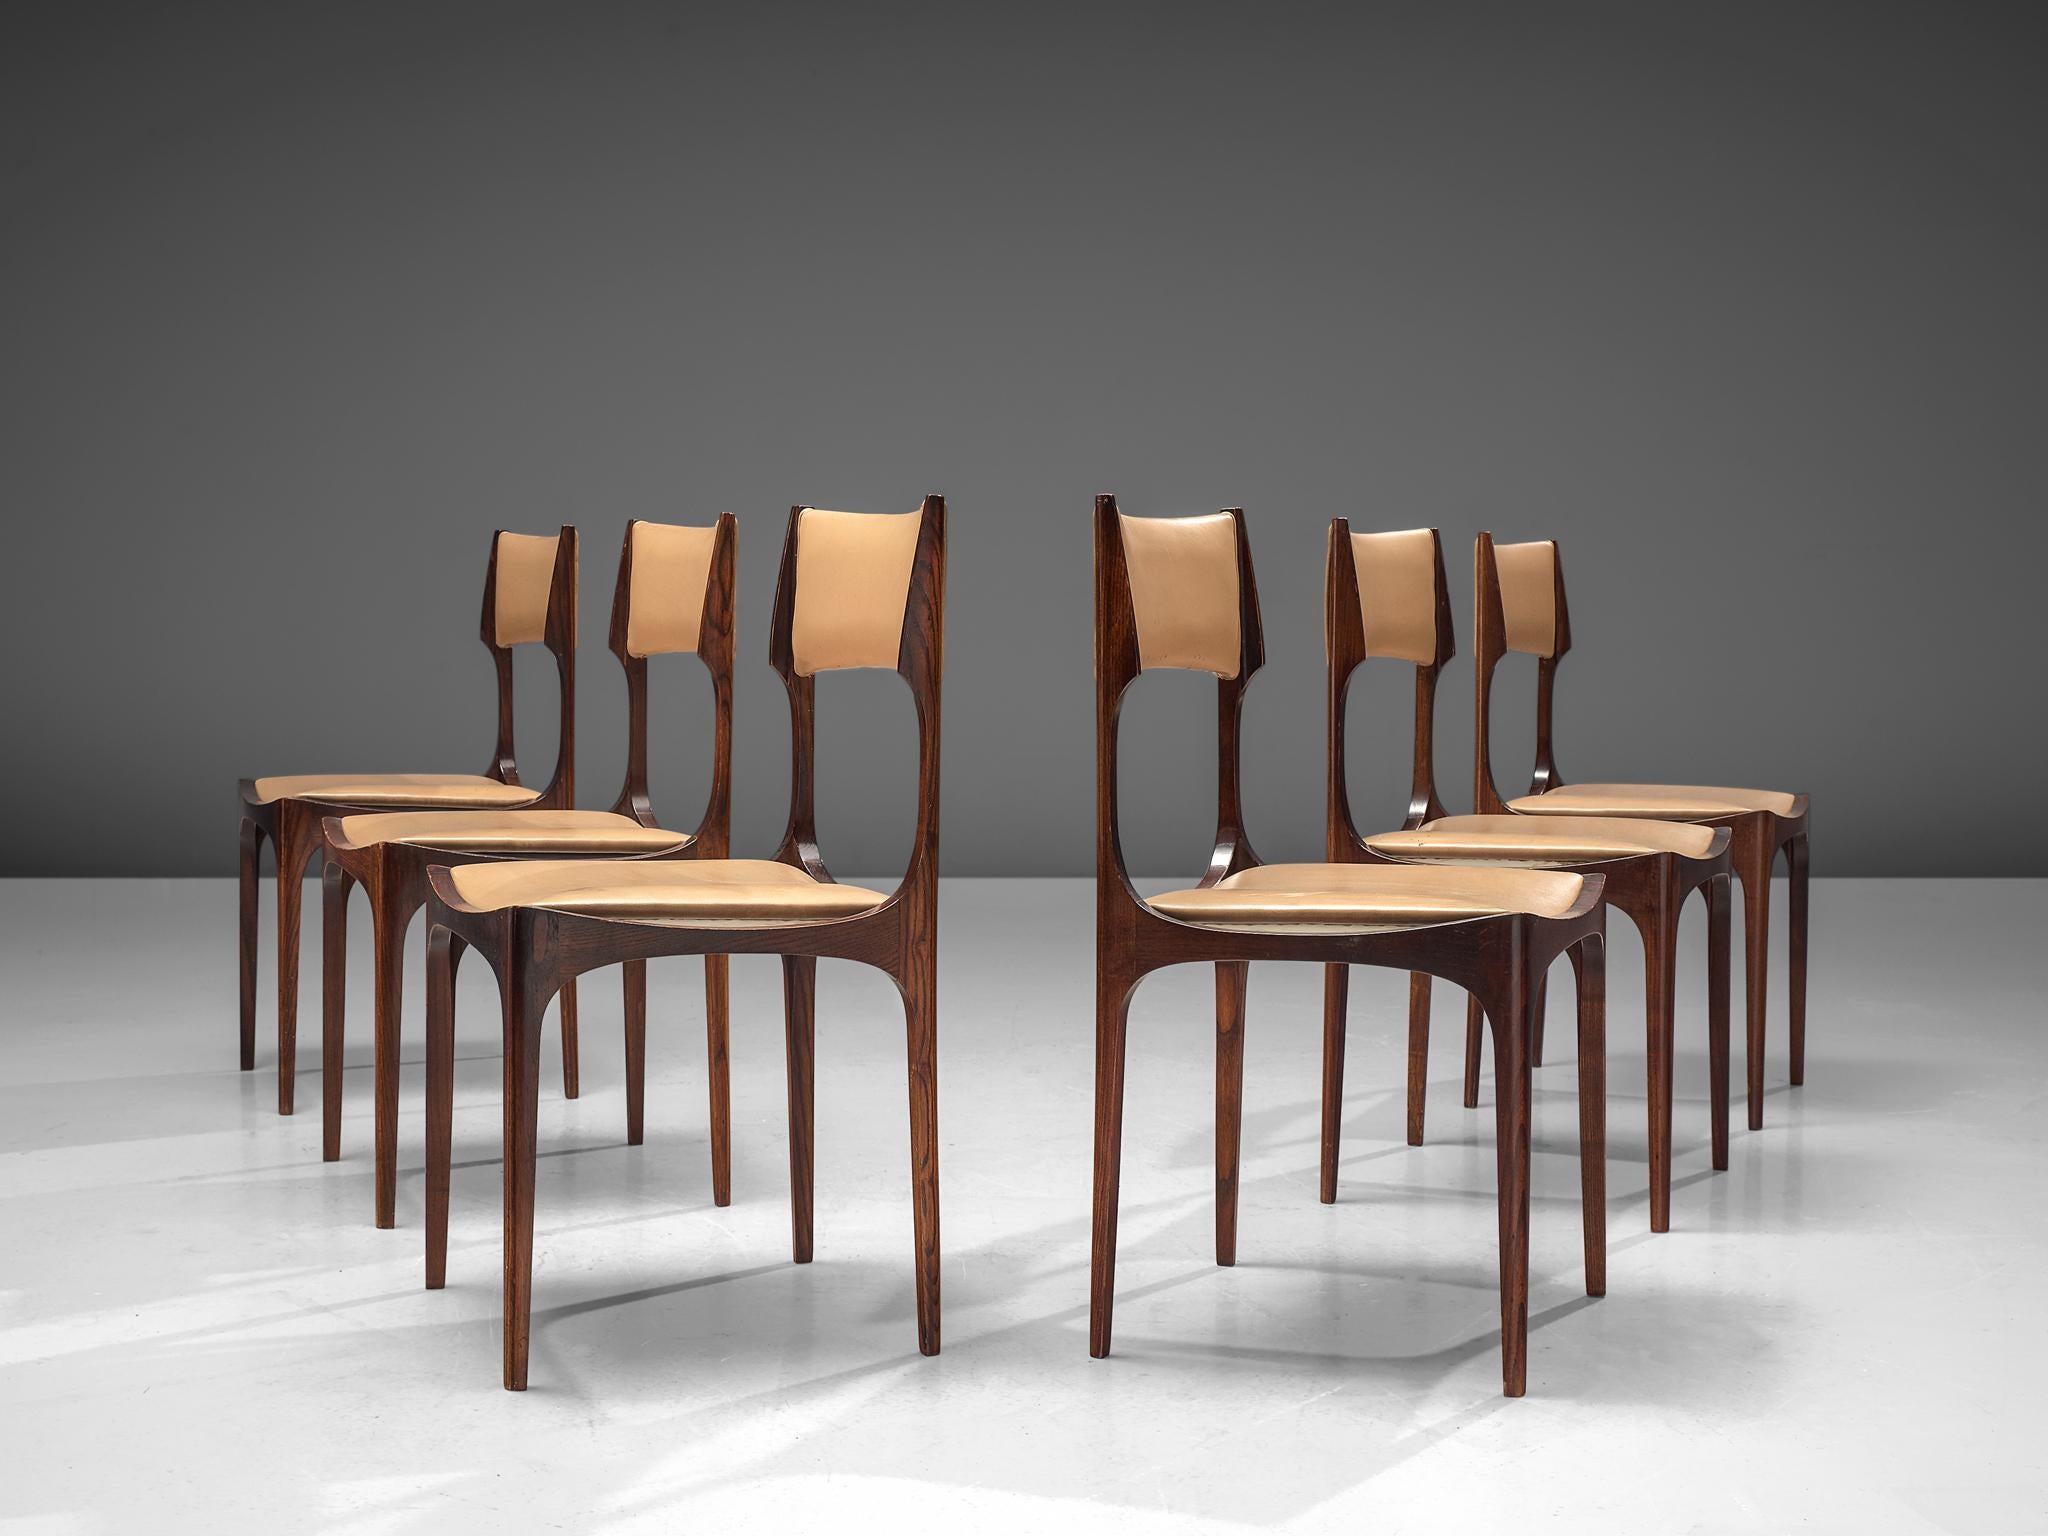 Giuseppe Gibelli for Sormani, set of six dining chairs, maple and leatherette, Italy, 1963.

This elegant set of Italian dining chairs is executed in high-quality maple and beige leatherette. The strength of these chairs lies mainly in the frame.